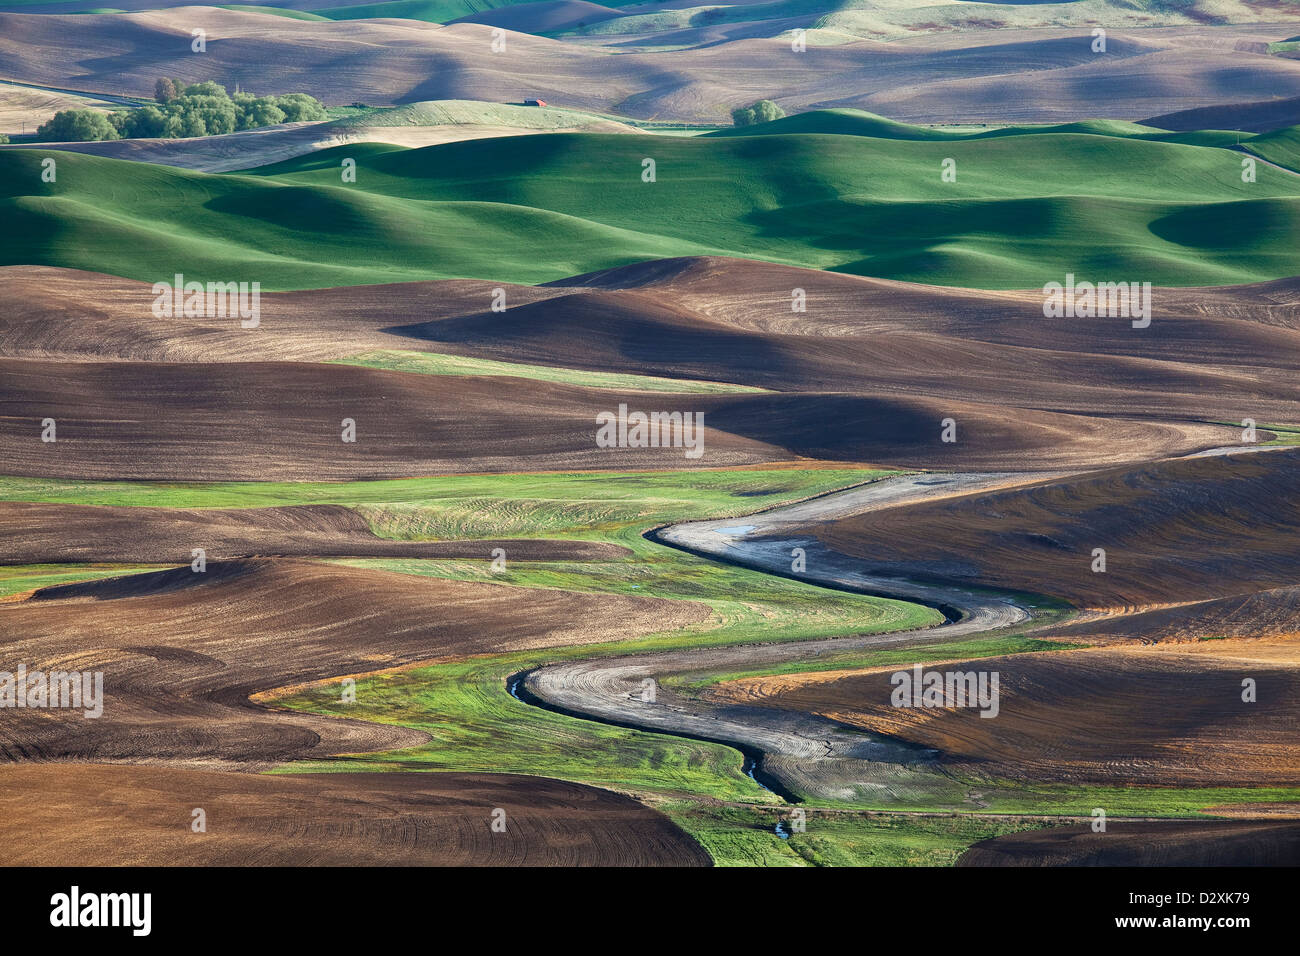 Aerial view of river winding through landscape Stock Photo